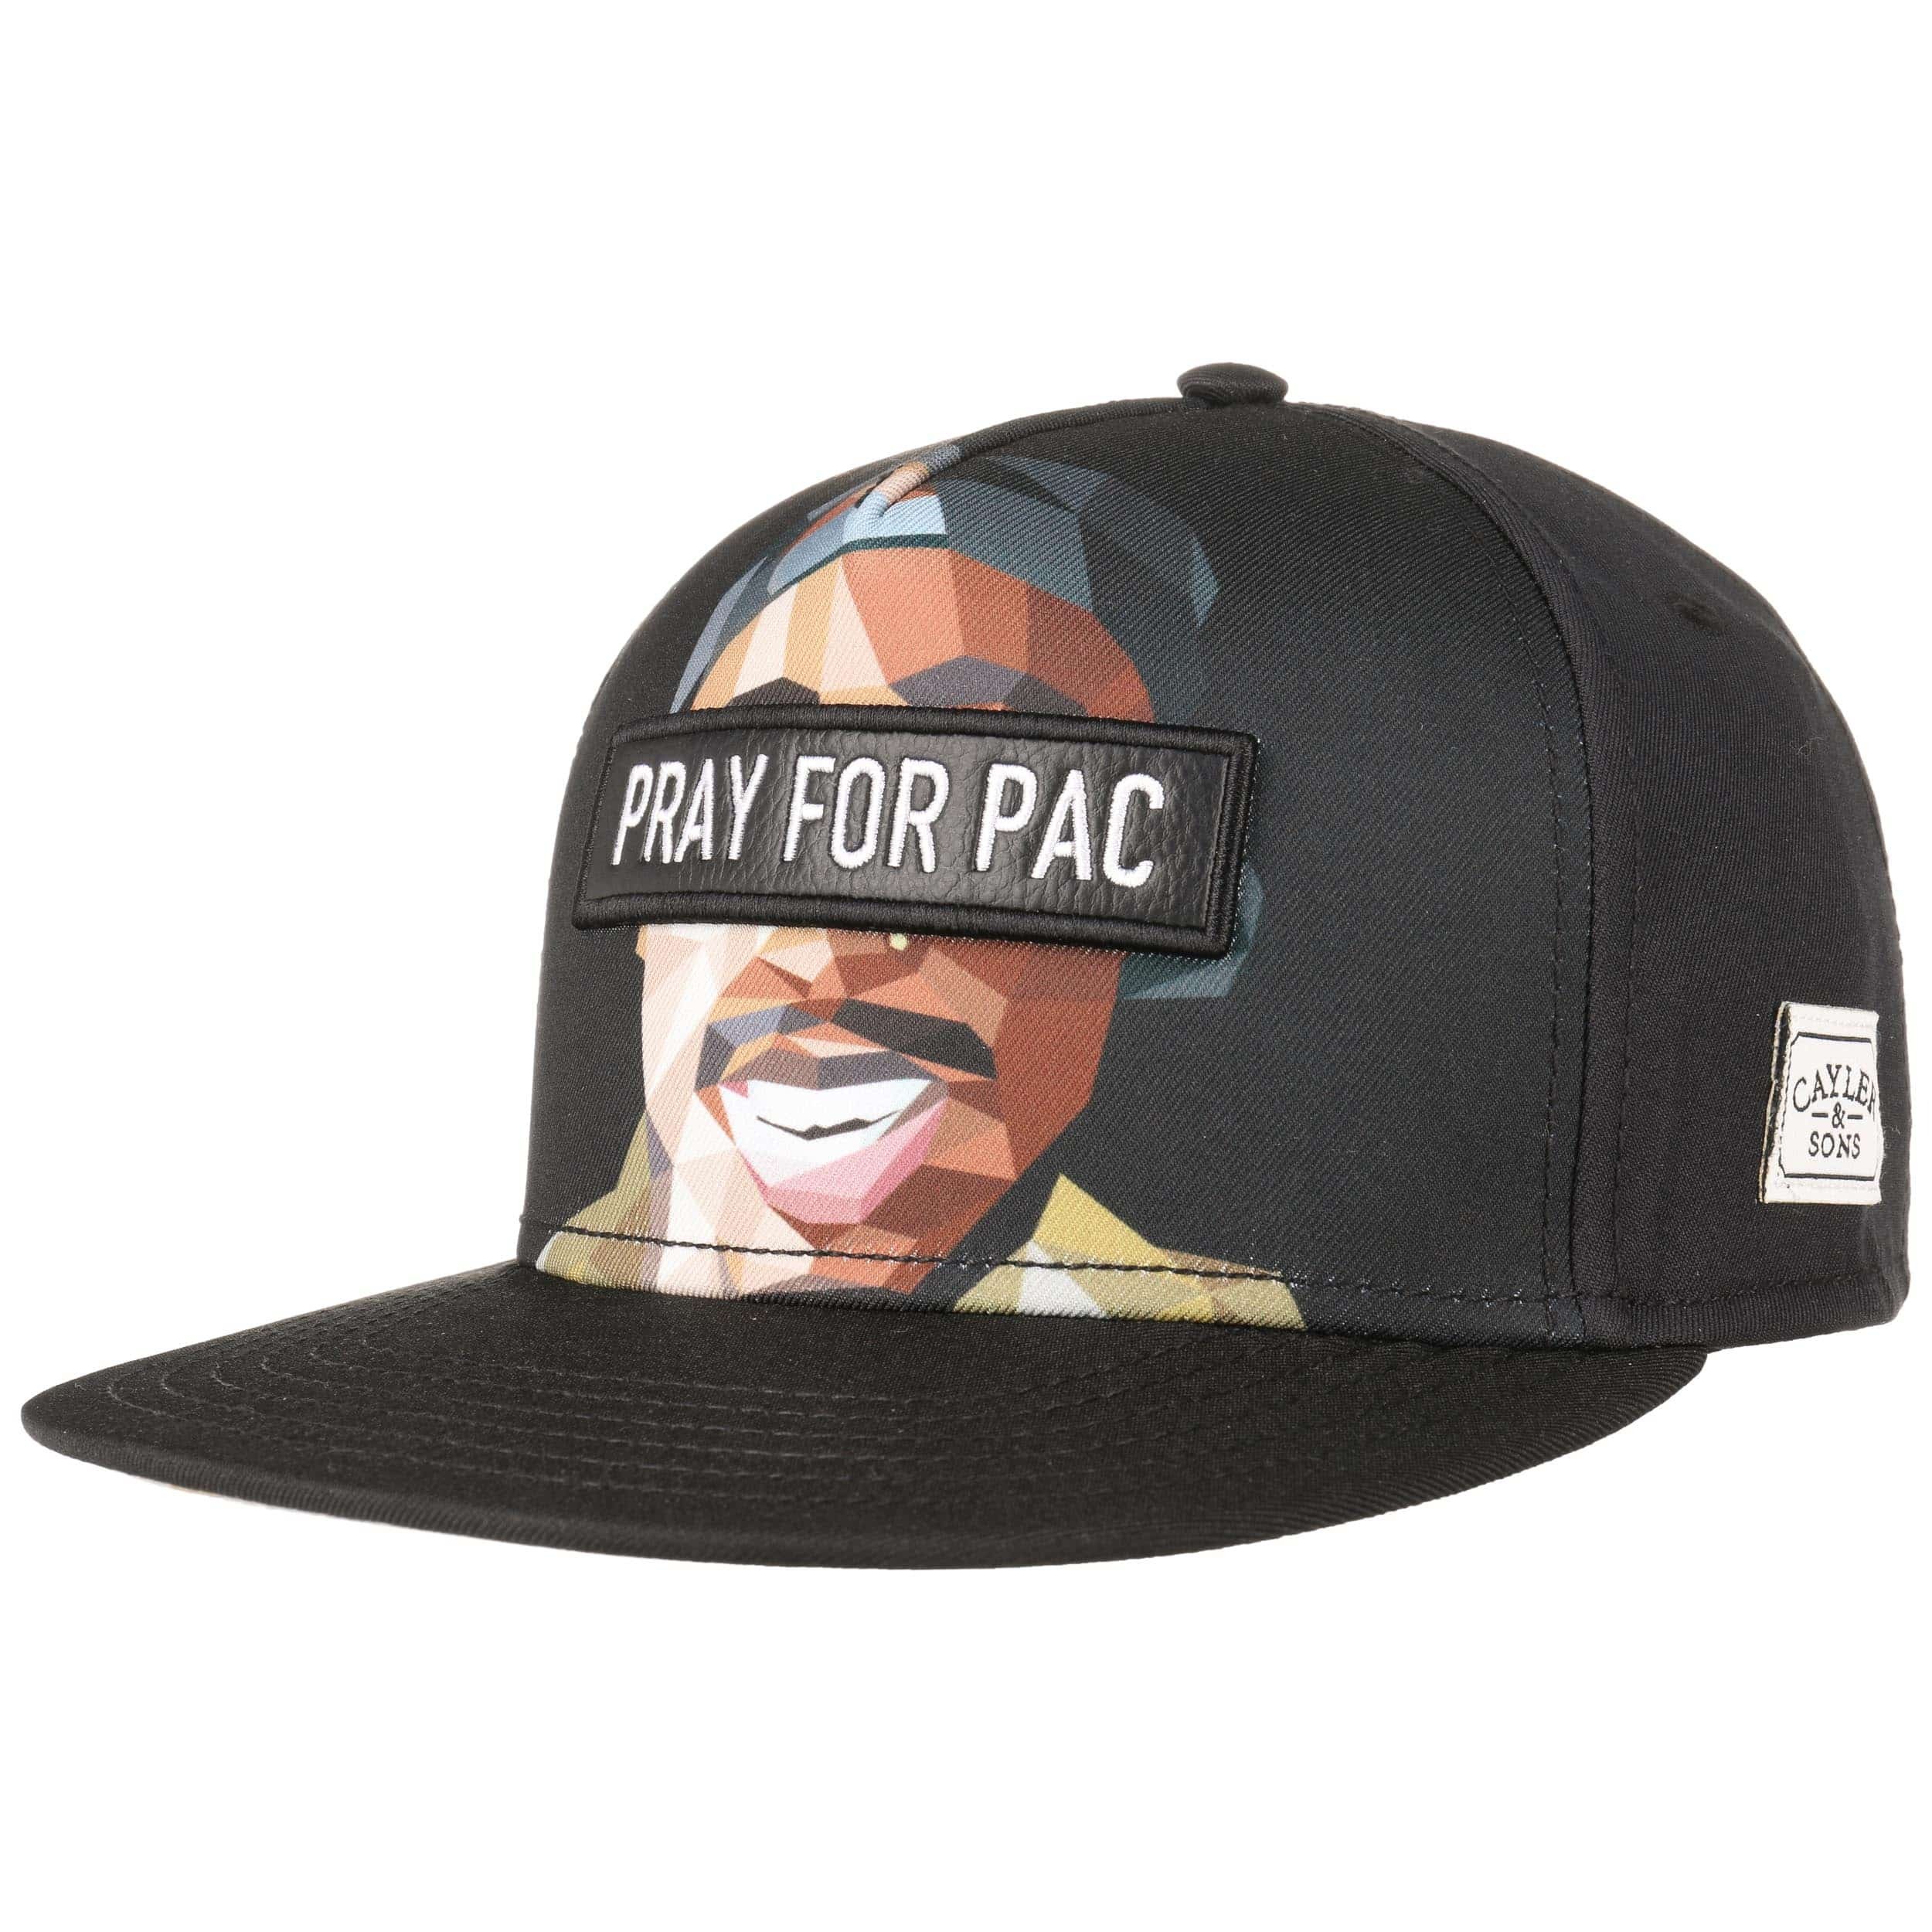 by Sons & - 37,95 Cap Pacasso € Snapback Cayler